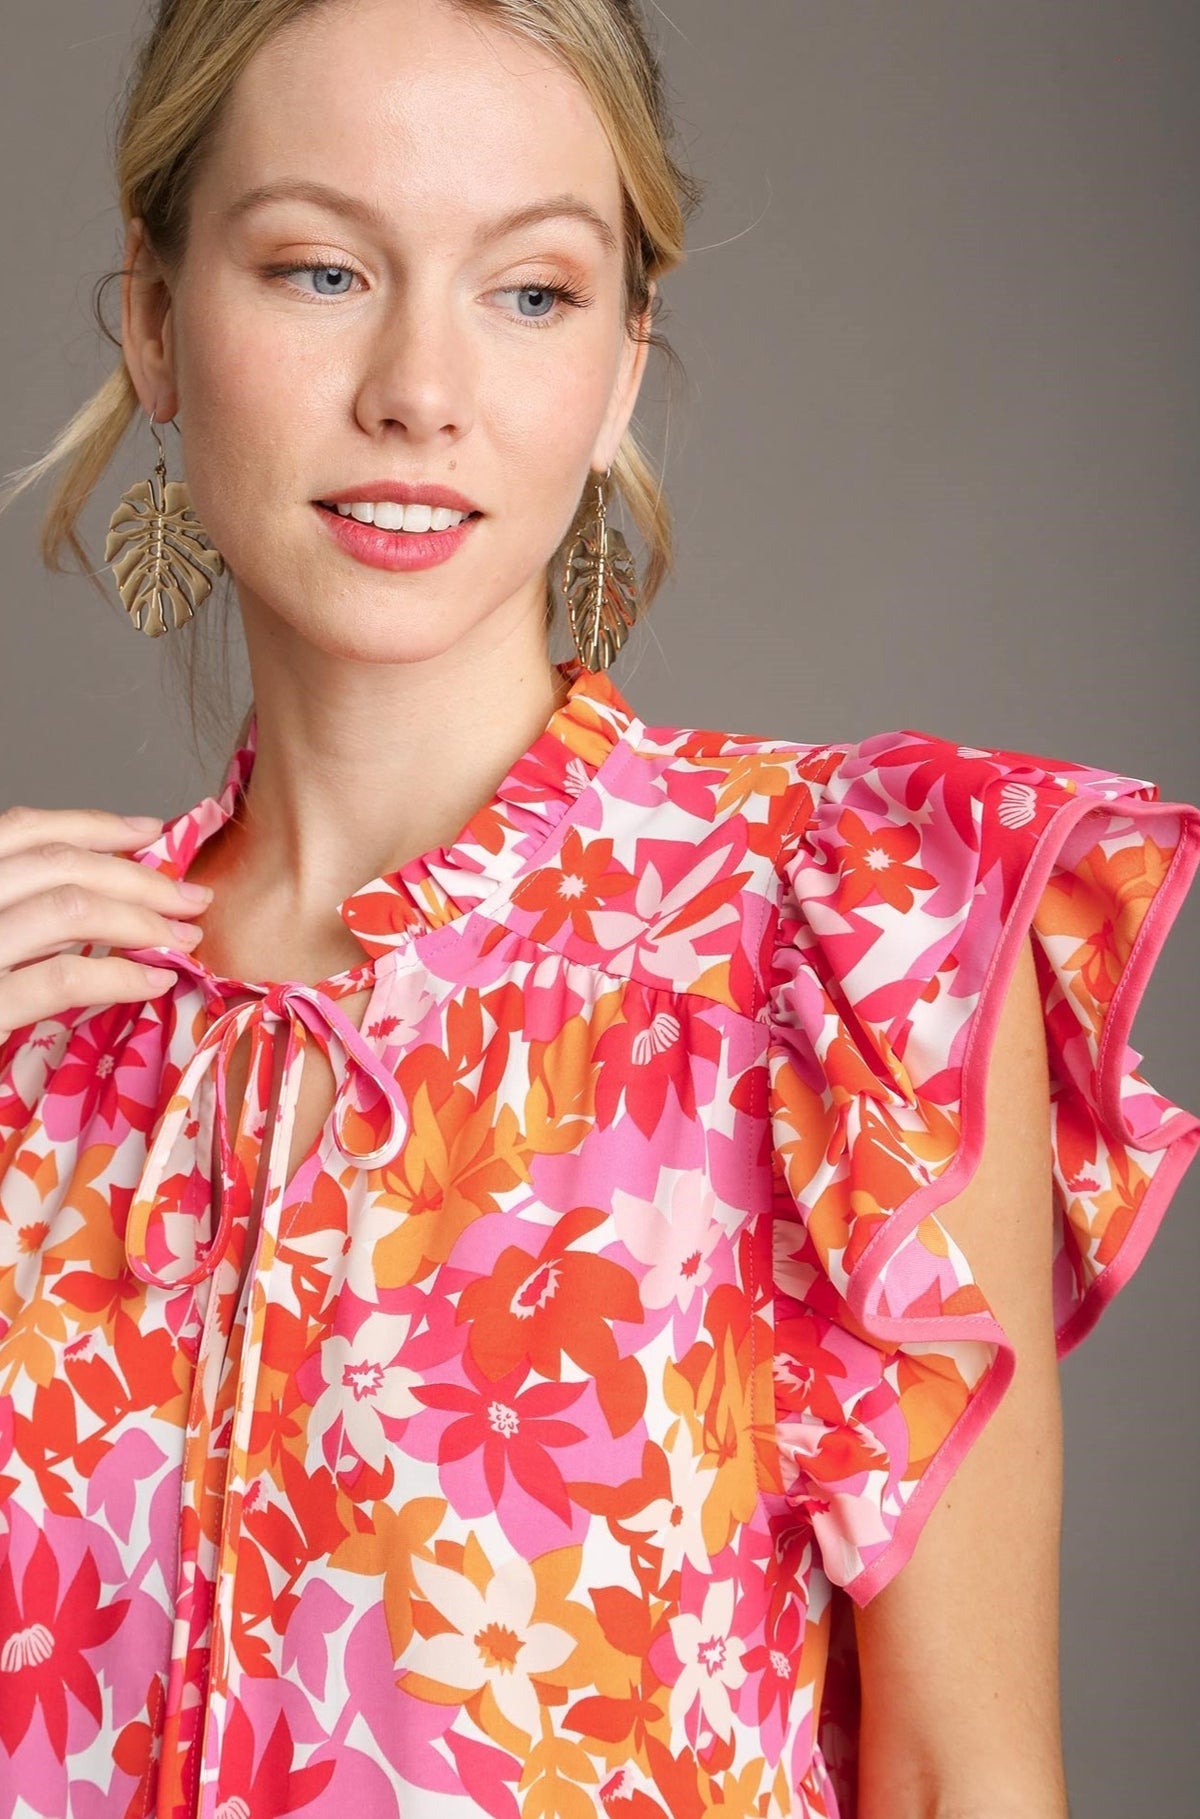 Frankly Floral Top - Red